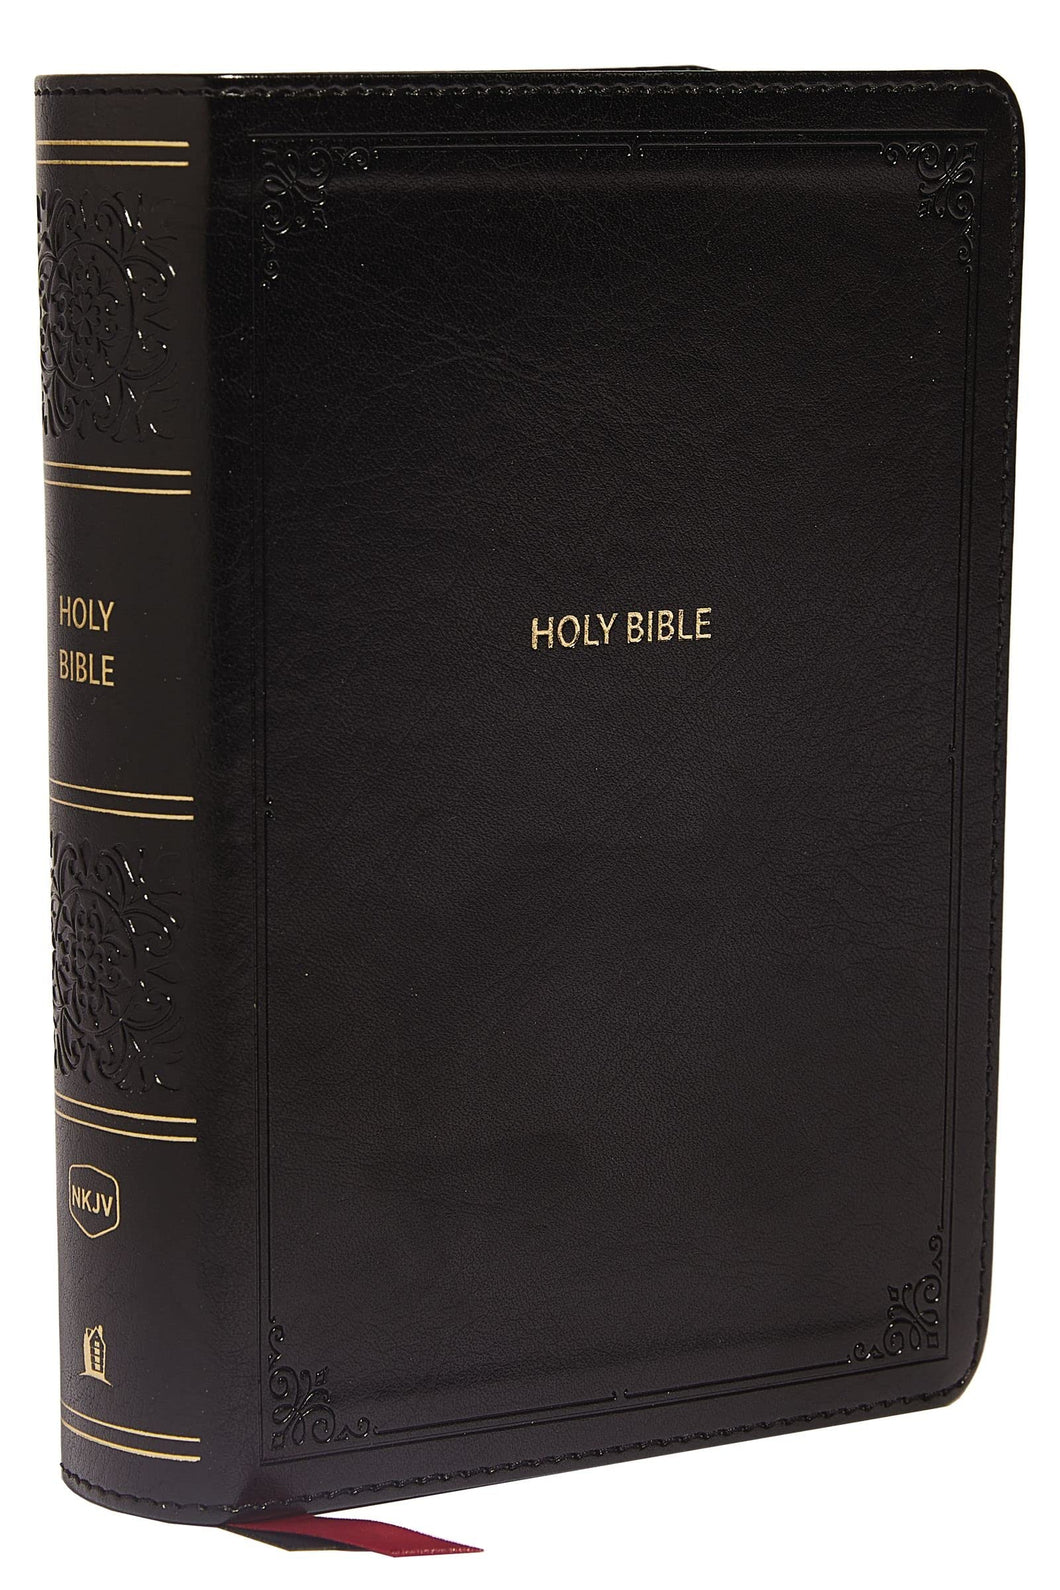 NKJV, End-of-Verse Reference Bible, Compact, Leathersoft, Black, Red Letter, Comfort Print: Holy Bible, New King James Version Imitation Leather